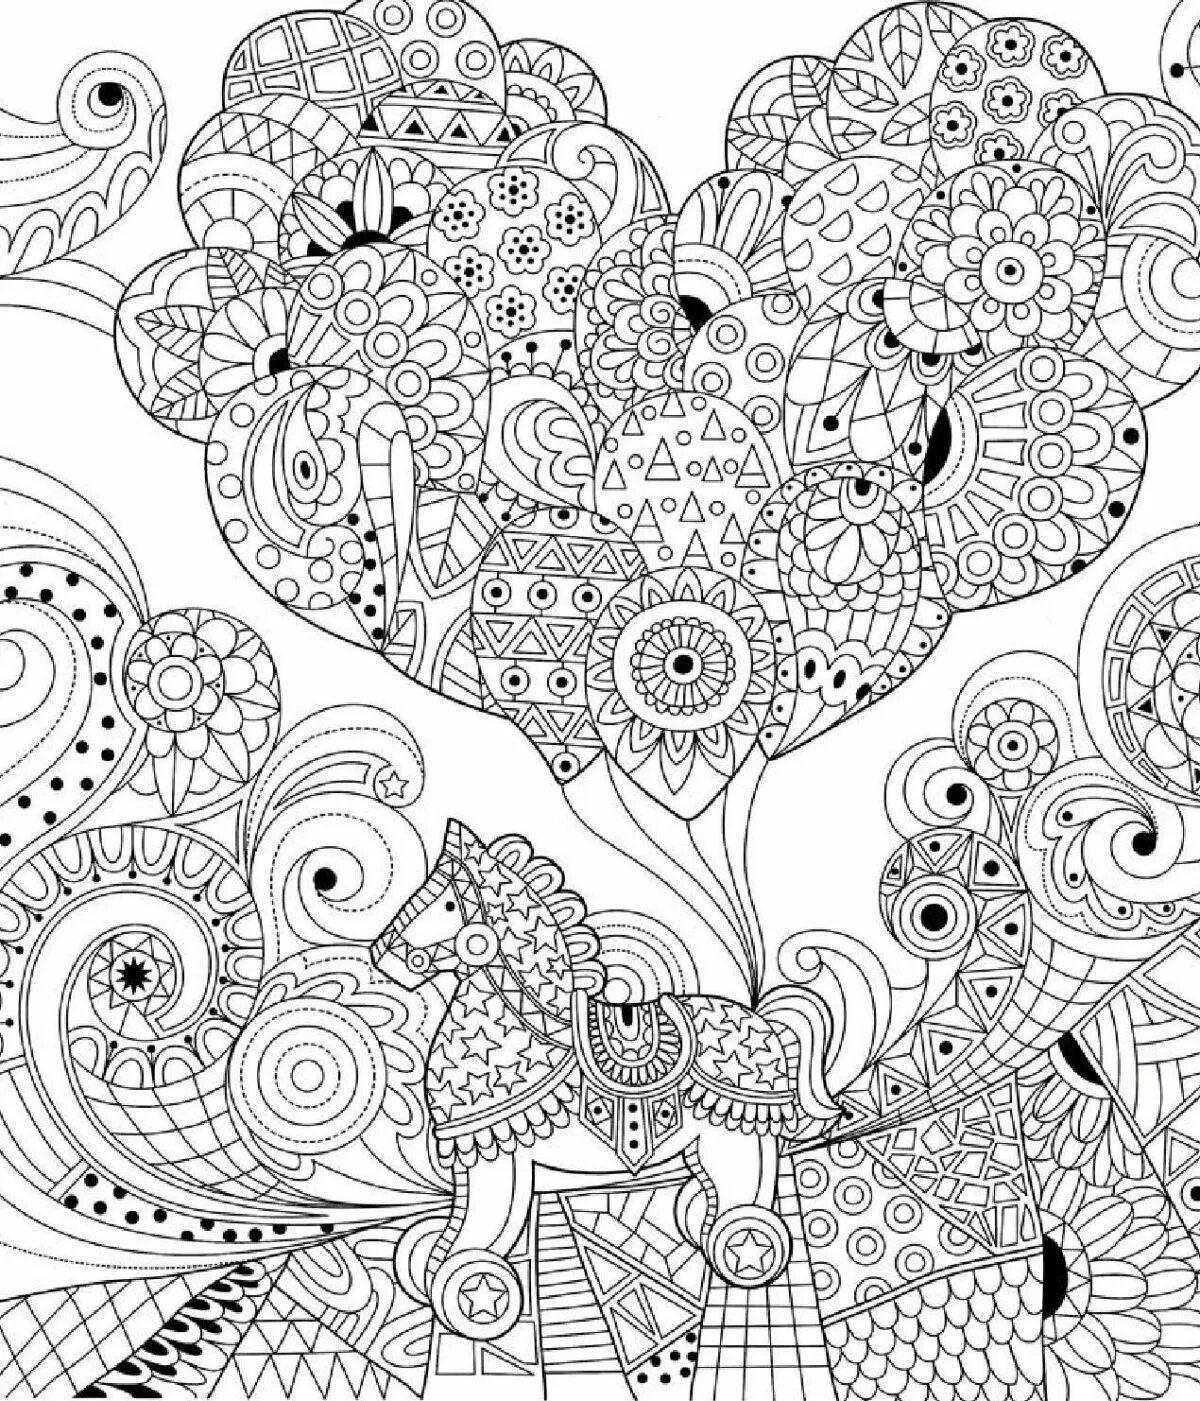 Calm coloring art therapy for adults